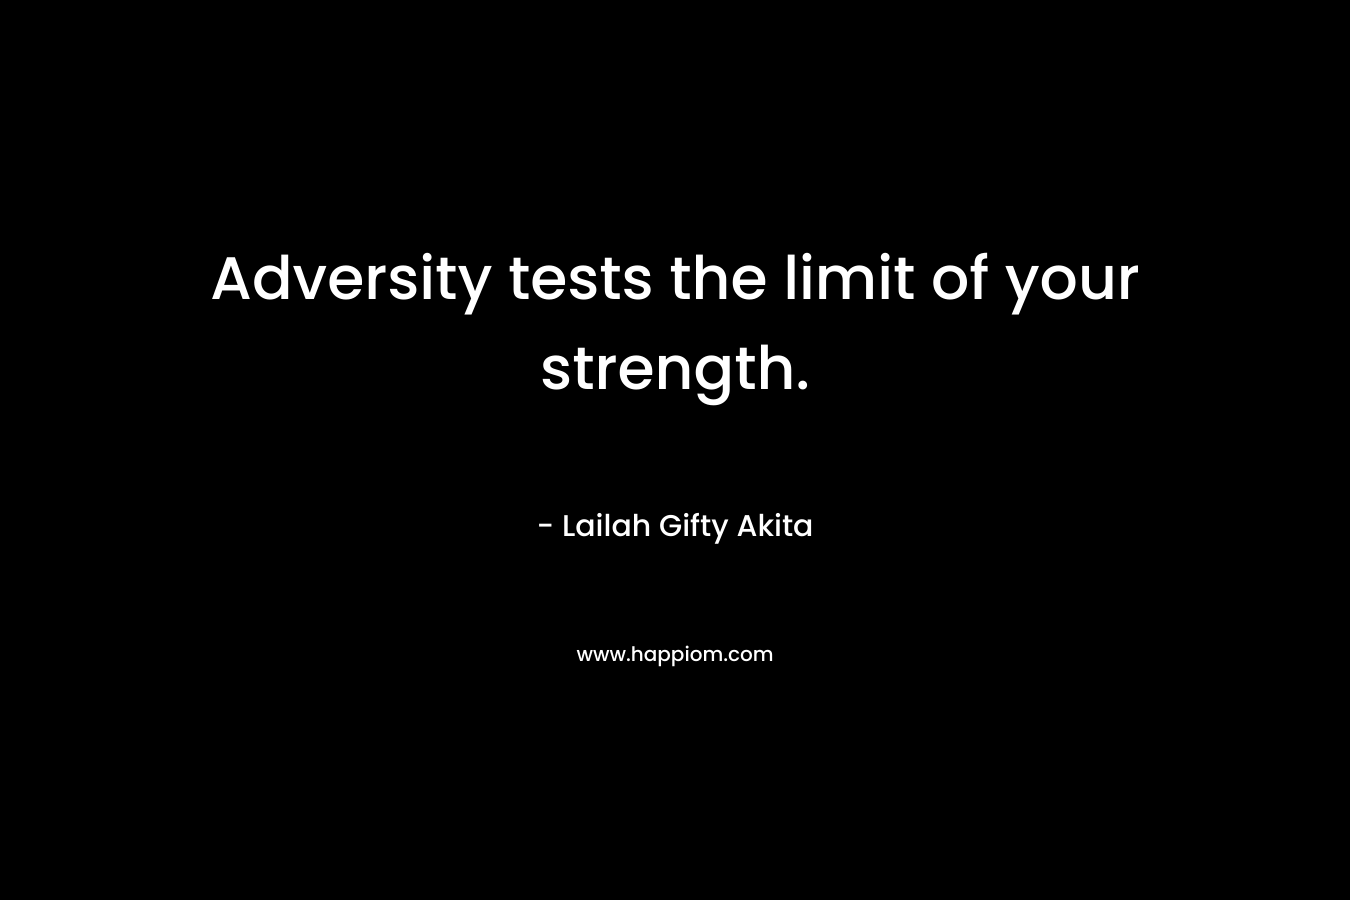 Adversity tests the limit of your strength.